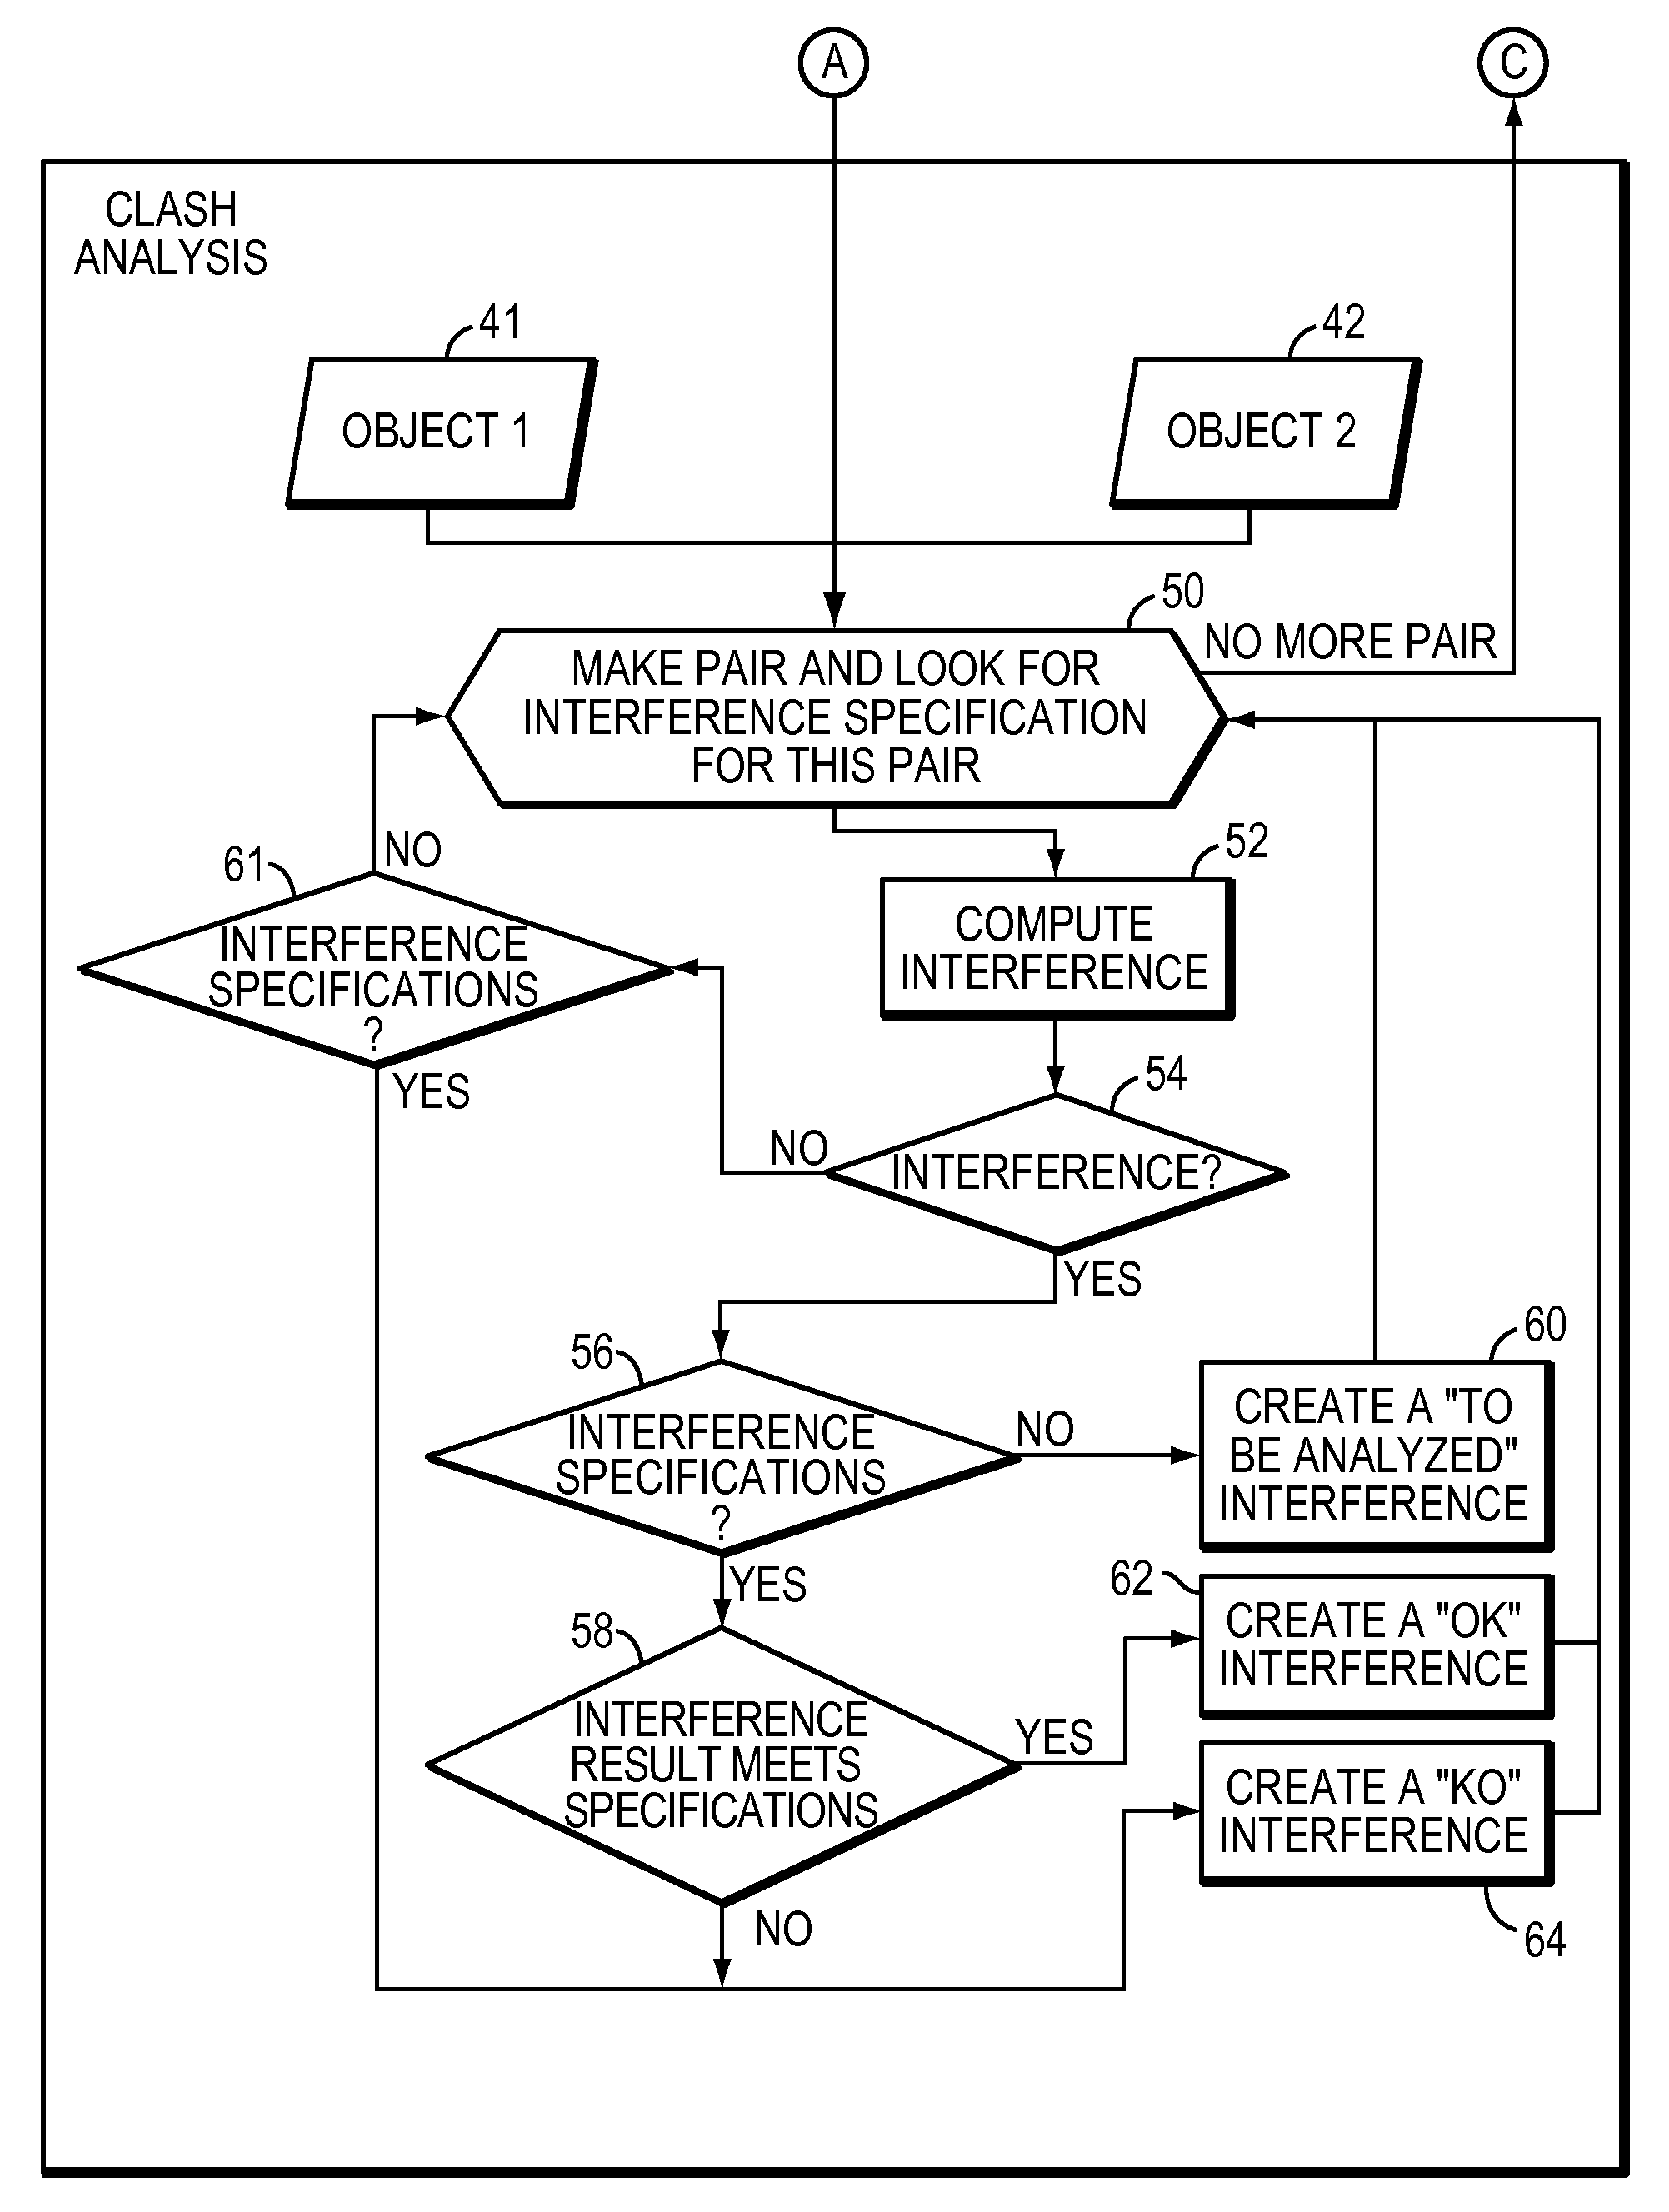 Process of updating a status of relation between objects in a system of computer-aided design of objects